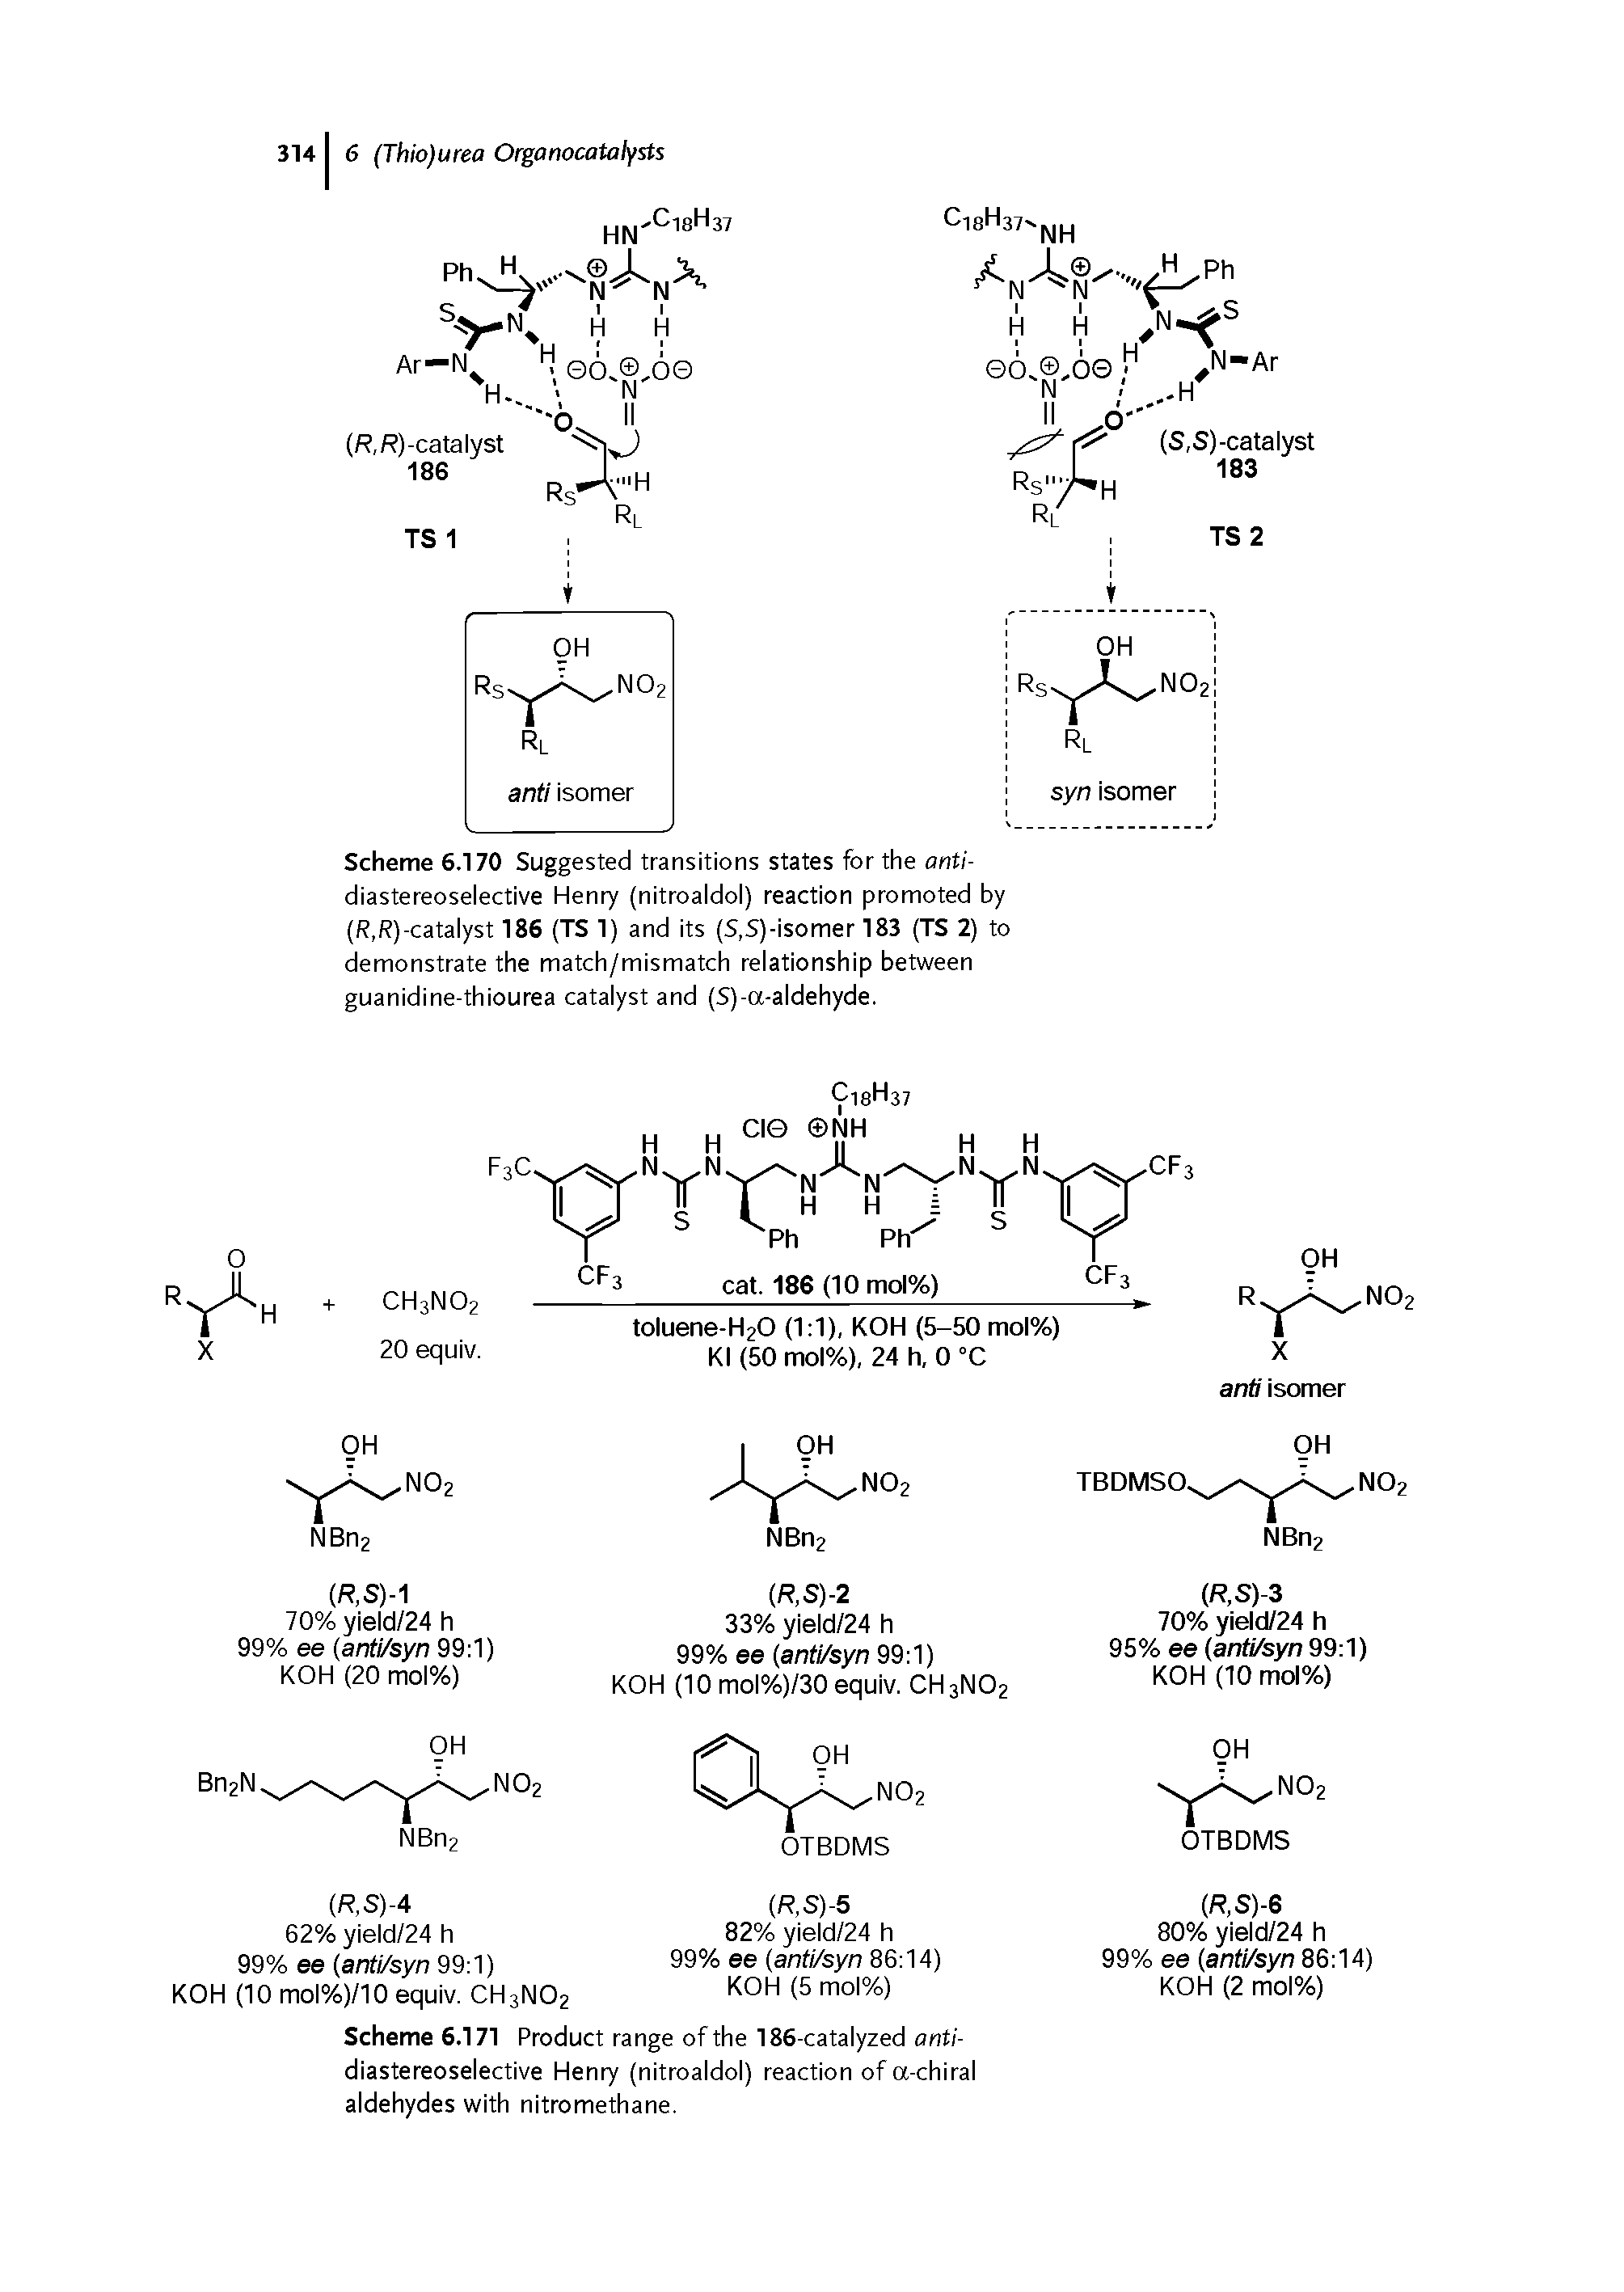 Scheme 6.170 Suggested transitions states for the anti-diastereoselective Henry (nitroaldol) reaction promoted by (R,R)-catalyst 186 (TS 1) and its (S,S)-isomer 183 (TS 2) to demonstrate the match/mismatch relationship between guanidine-thiourea catalyst and (S)-a-aldehyde.